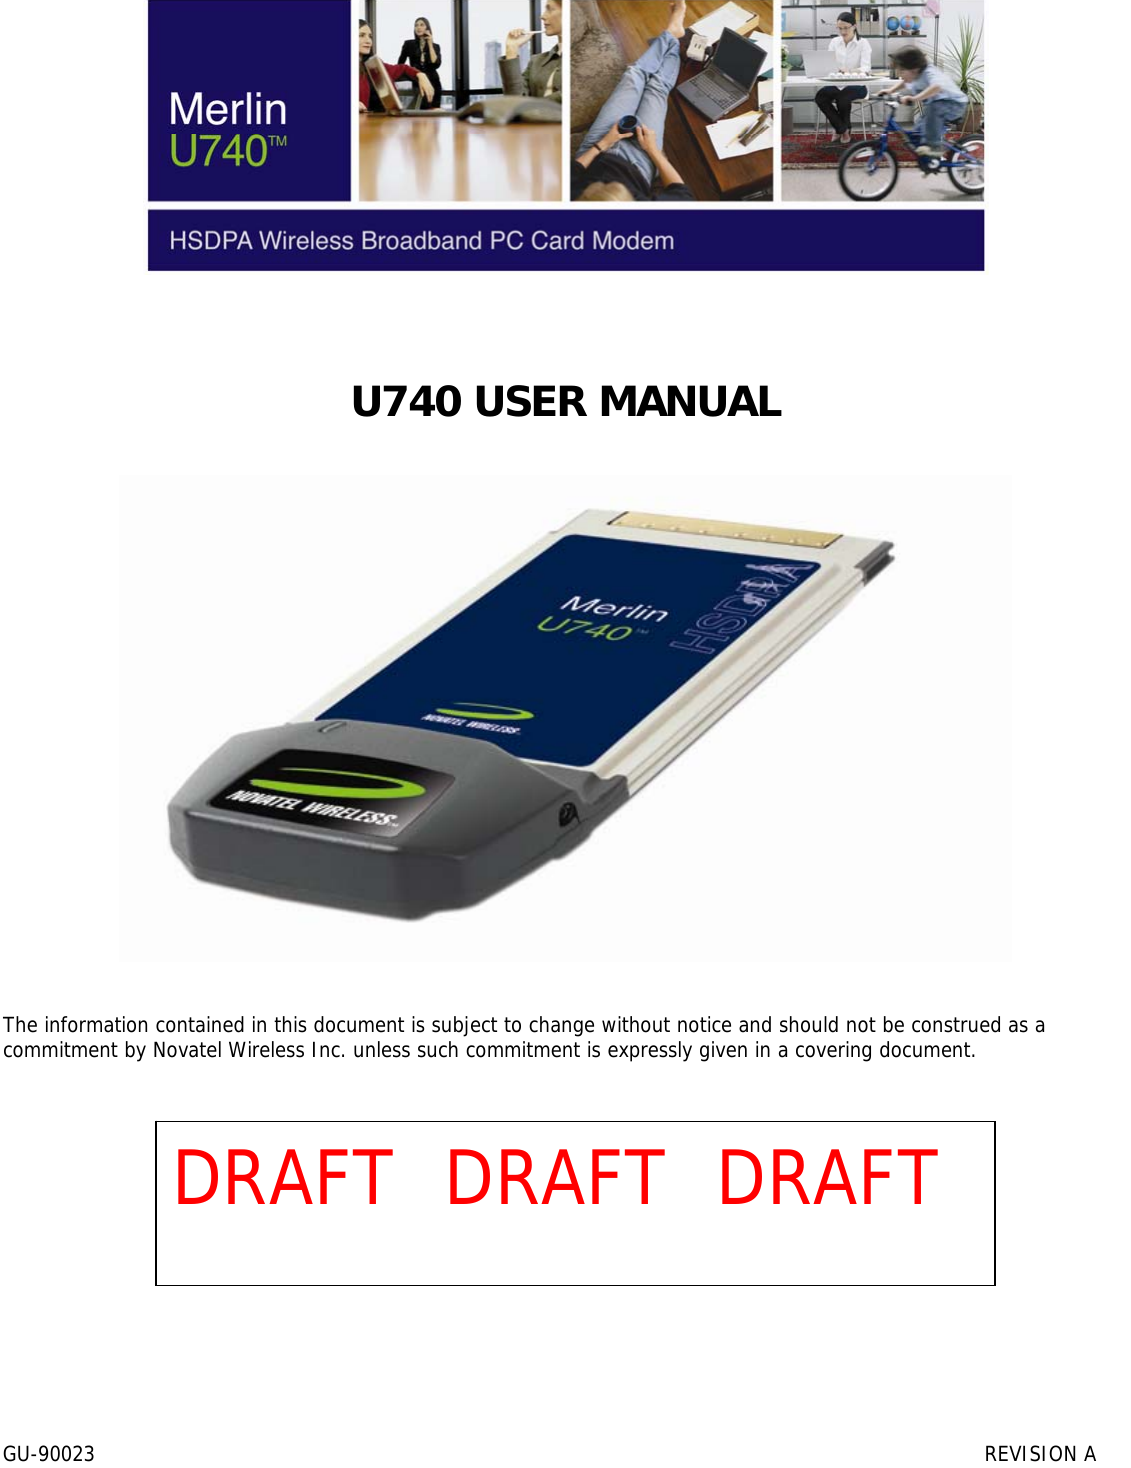  GU-90023                 REVISION A            U740 USER MANUAL      The information contained in this document is subject to change without notice and should not be construed as a commitment by Novatel Wireless Inc. unless such commitment is expressly given in a covering document.                DRAFT  DRAFT  DRAFT 